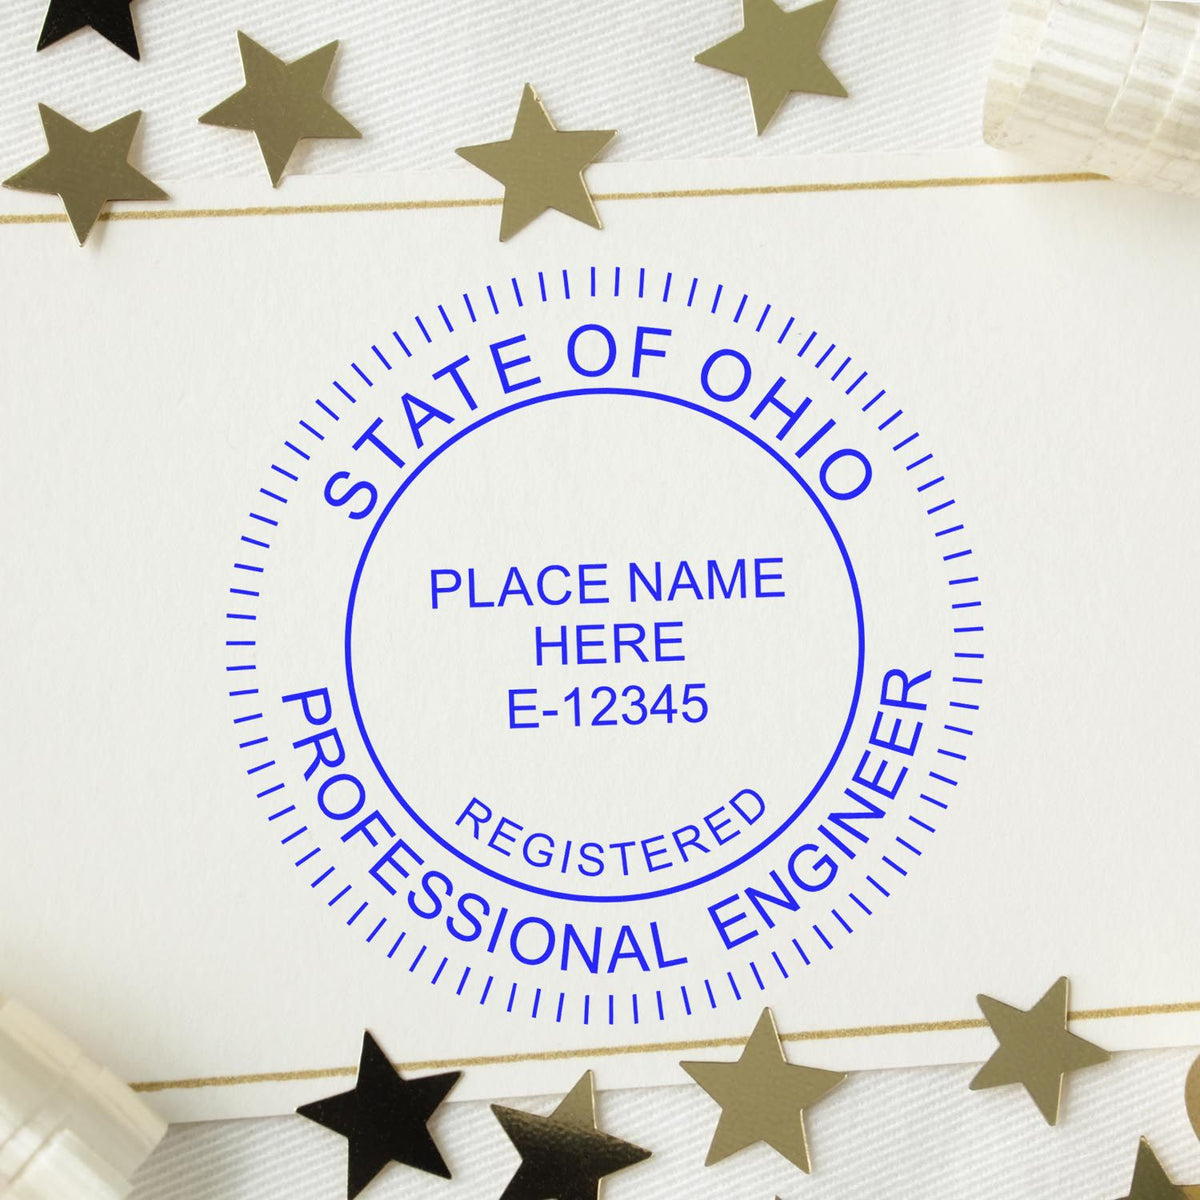 The Self-Inking Ohio PE Stamp stamp impression comes to life with a crisp, detailed photo on paper - showcasing true professional quality.